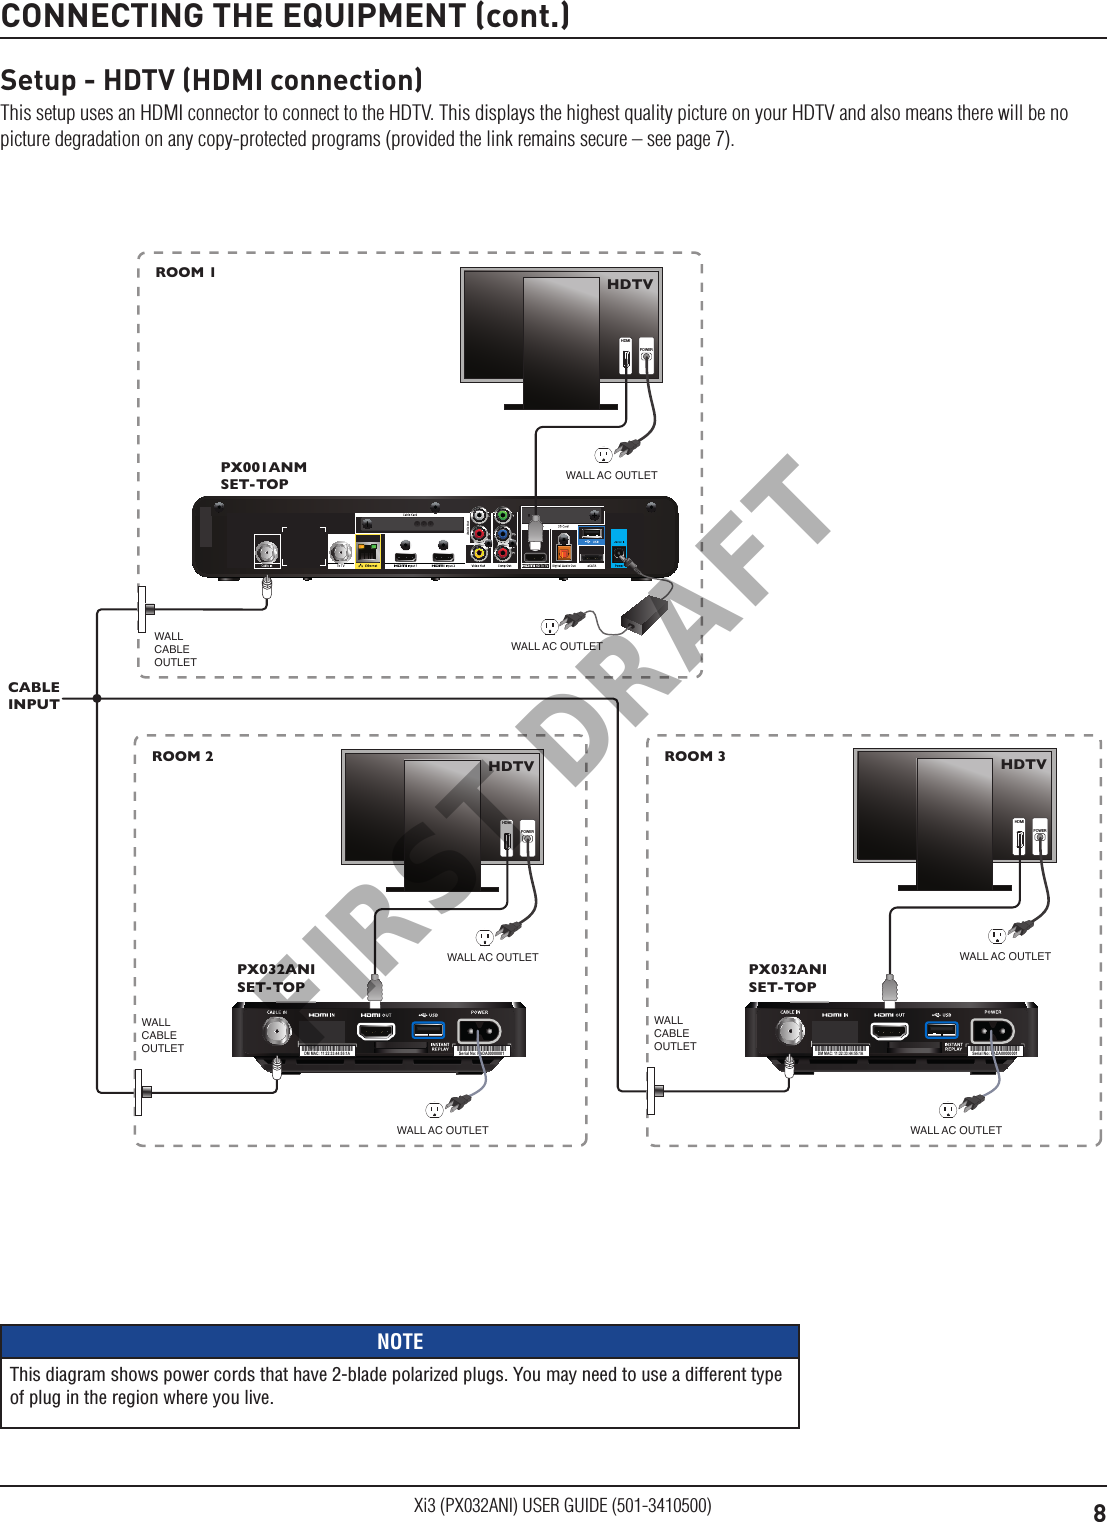 8Xi3 (PX032ANI) USER GUIDE (501-3410500)CONNECTING THE EQUIPMENT (cont.)Serial No: PADA00000001CCS1234N12345678CCS1234N12345678DM MAC: 11:22:33:44:55:1ASerial No: PADA00000001CCS1234N12345678CCS1234N12345678DM MAC: 11:22:33:44:55:1AHDMIHDTVPOWERHDMIHDTVPOWERPX001ANMSET-TOPROOM 1PX032ANISET-TOPPX032ANISET-TOPWALL AC OUTLETCABLE INPUTWALL AC OUTLETWALL AC OUTLETWALL CABLE OUTLETROOM 2WALL CABLE OUTLETHDMIHDTVPOWERWALL AC OUTLETROOM 3WALL CABLE OUTLETWALL AC OUTLET WALL AC OUTLETNOTEThis diagram shows power cords that have 2-blade polarized plugs. You may need to use a different type of plug in the region where you live.Setup - HDTV (HDMI connection)This setup uses an HDMI connector to connect to the HDTV. This displays the highest quality picture on your HDTV and also means there will be no picture degradation on any copy-protected programs (provided the link remains secure – see page 7).FIRST DRAFT